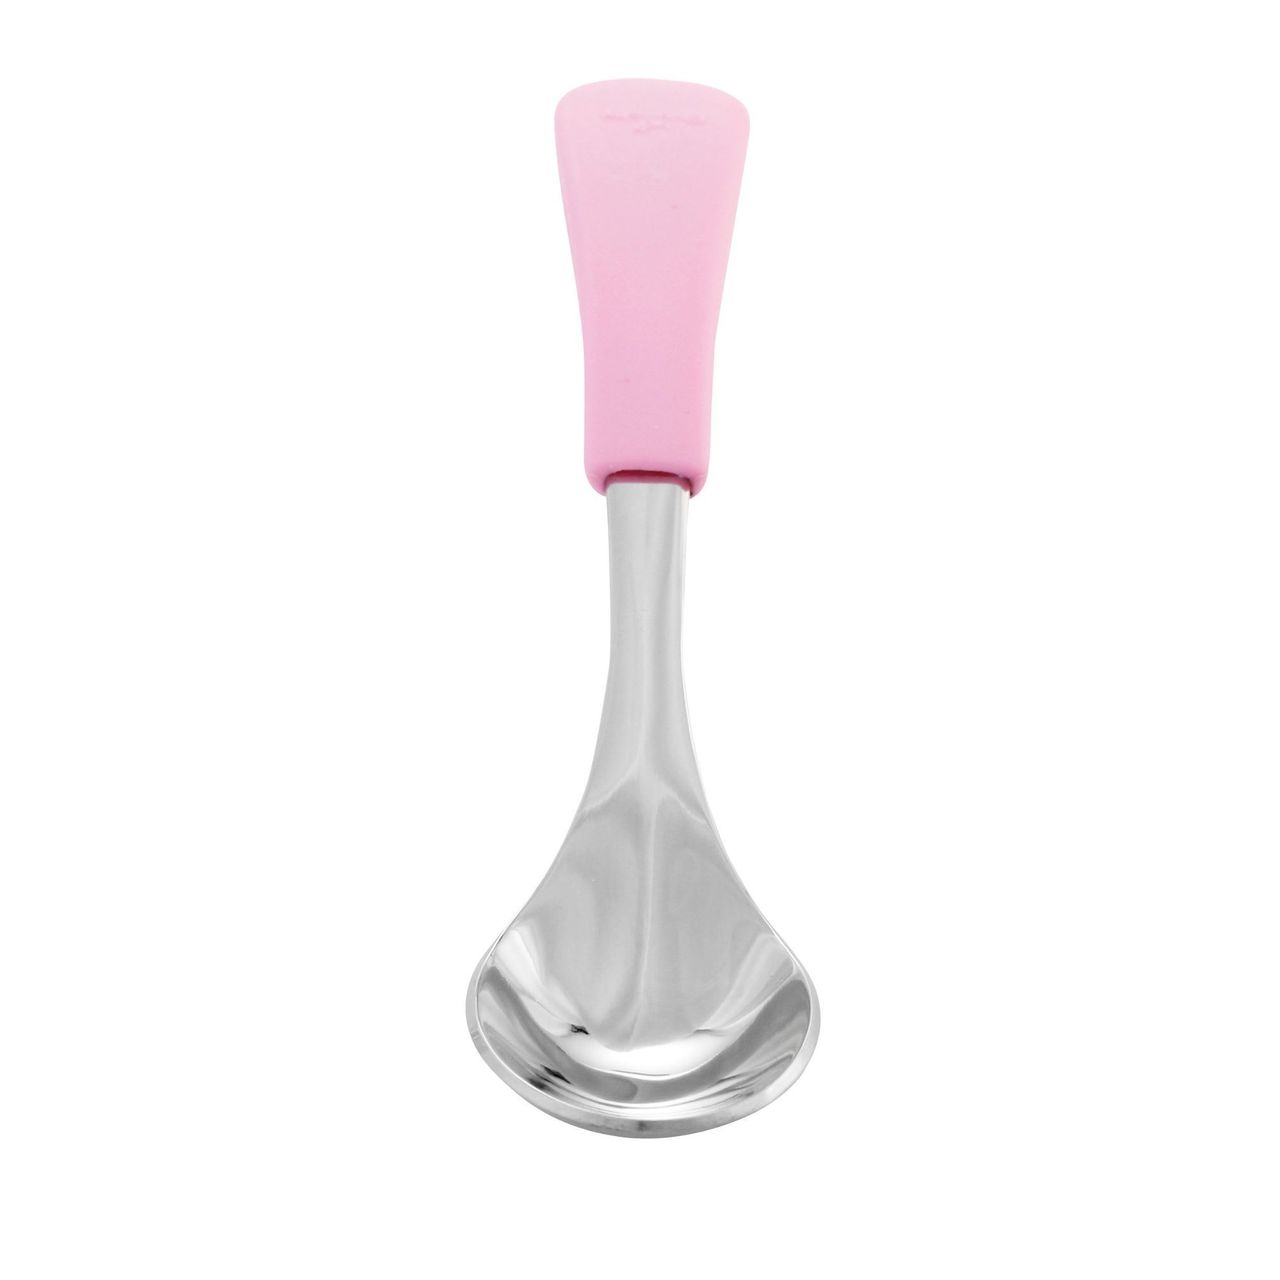 https://www.fluffaholic.com/cdn/shop/products/avanchy-stainless-steel-baby-spoons-2-pack-older-babies-avanchy-sustainable-baby-dishware-13_2000x__18906_4e198833-261f-46d2-96f7-53651e5e600f_1445x.jpg?v=1603390638